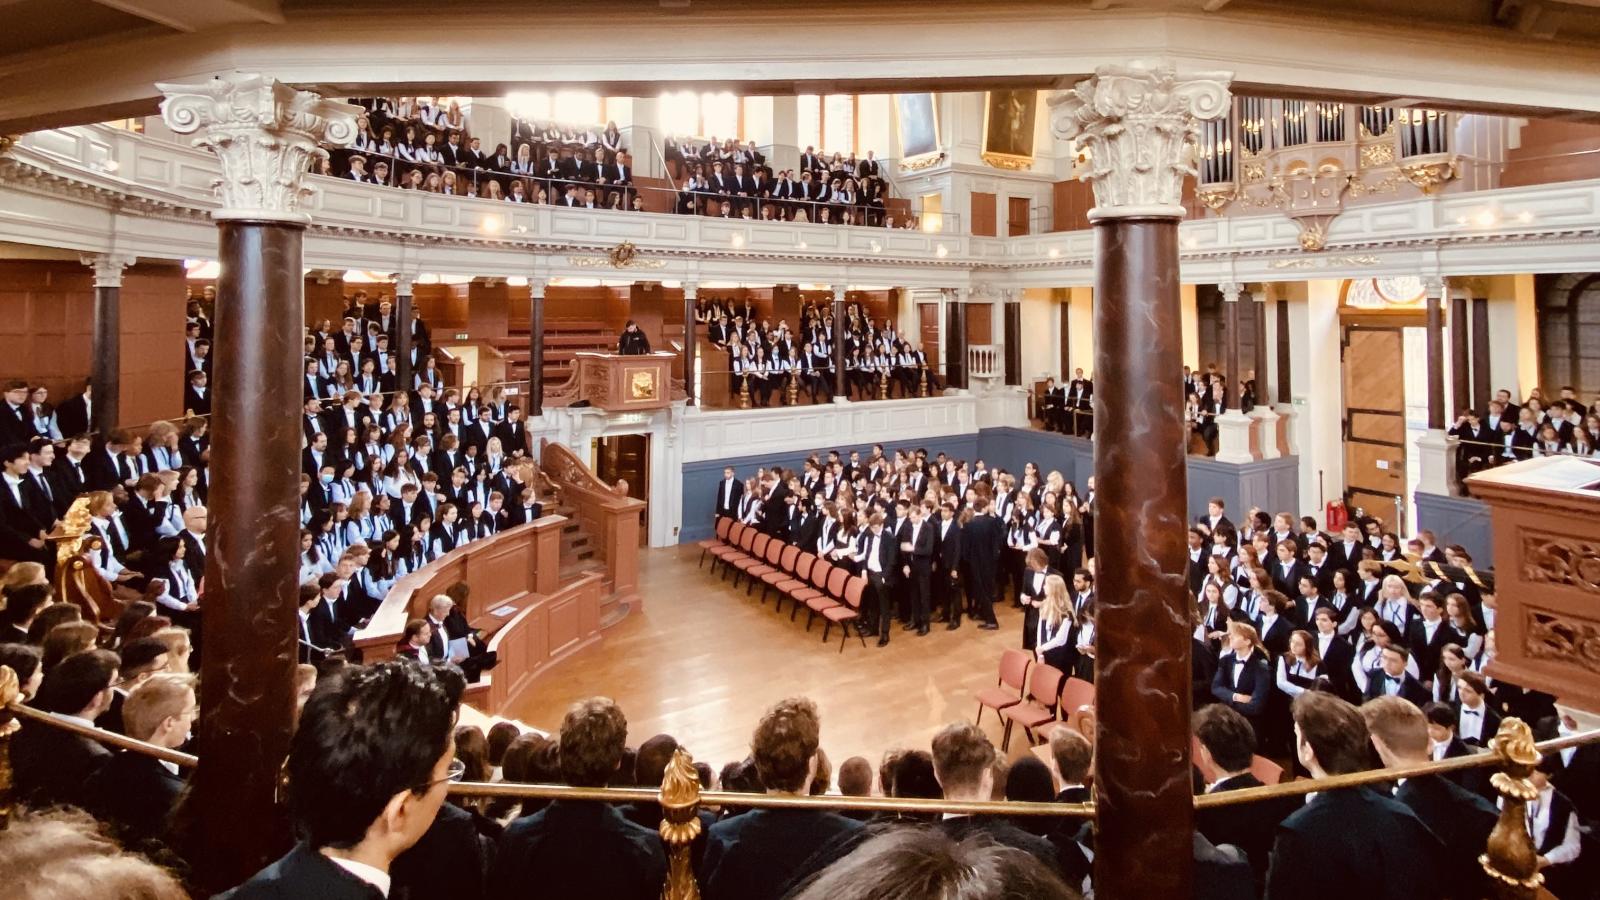 Students seated in the Sheldonian theatre, all wearing sub fusc